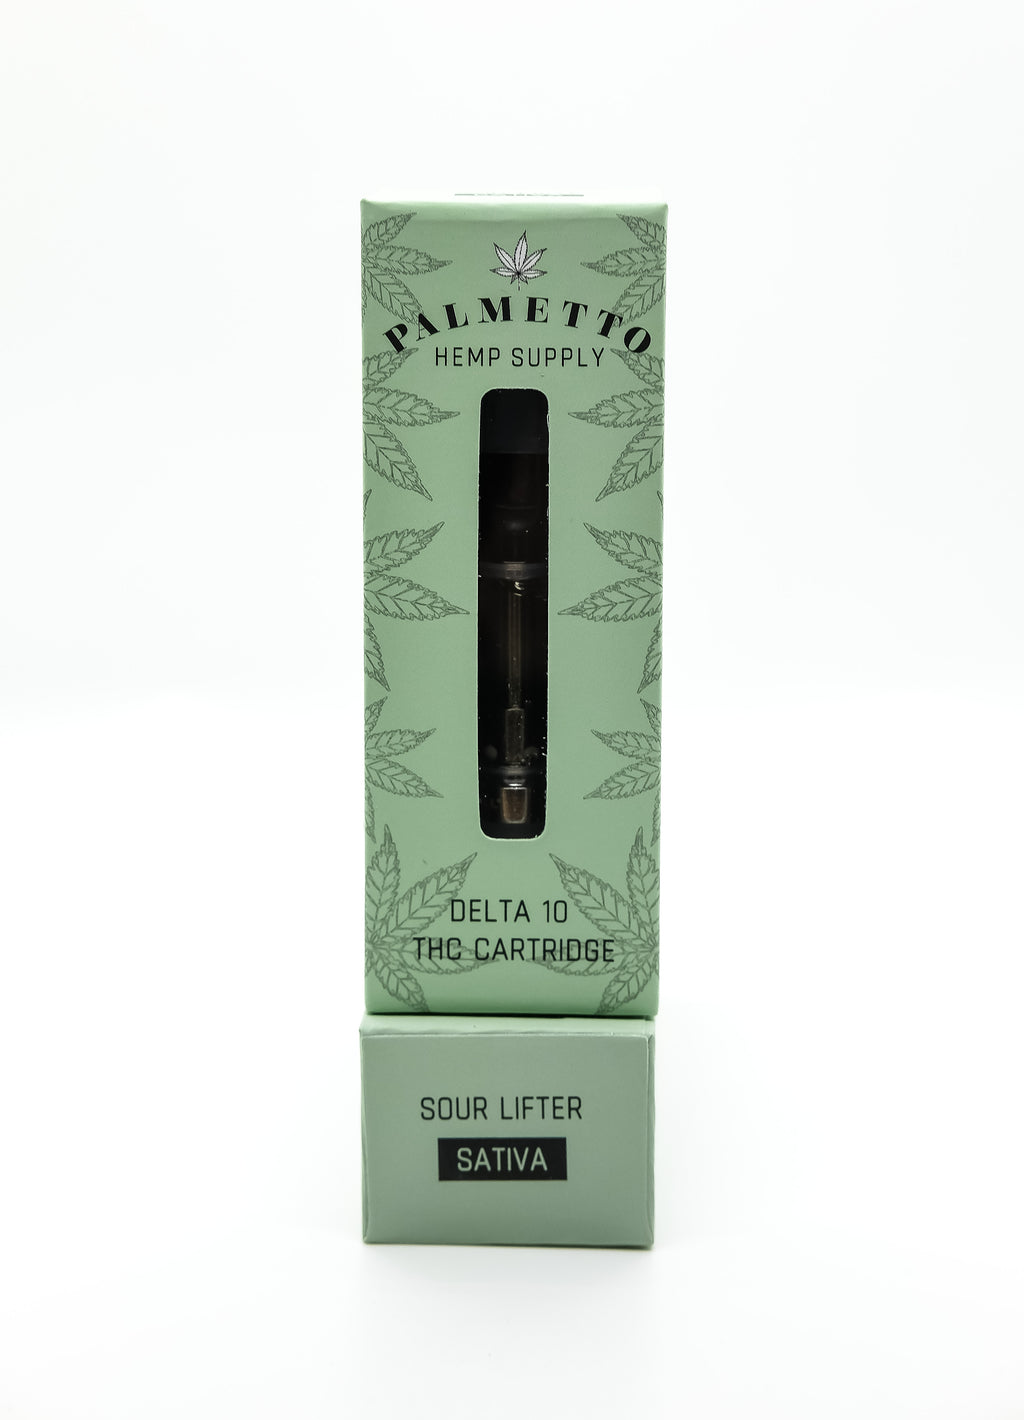 Palmetto Hemp Supply Delta-10 Sour Lifter 1 gram vape cartridge in a blue box with hemp leaves on it. The background of the photo is white.